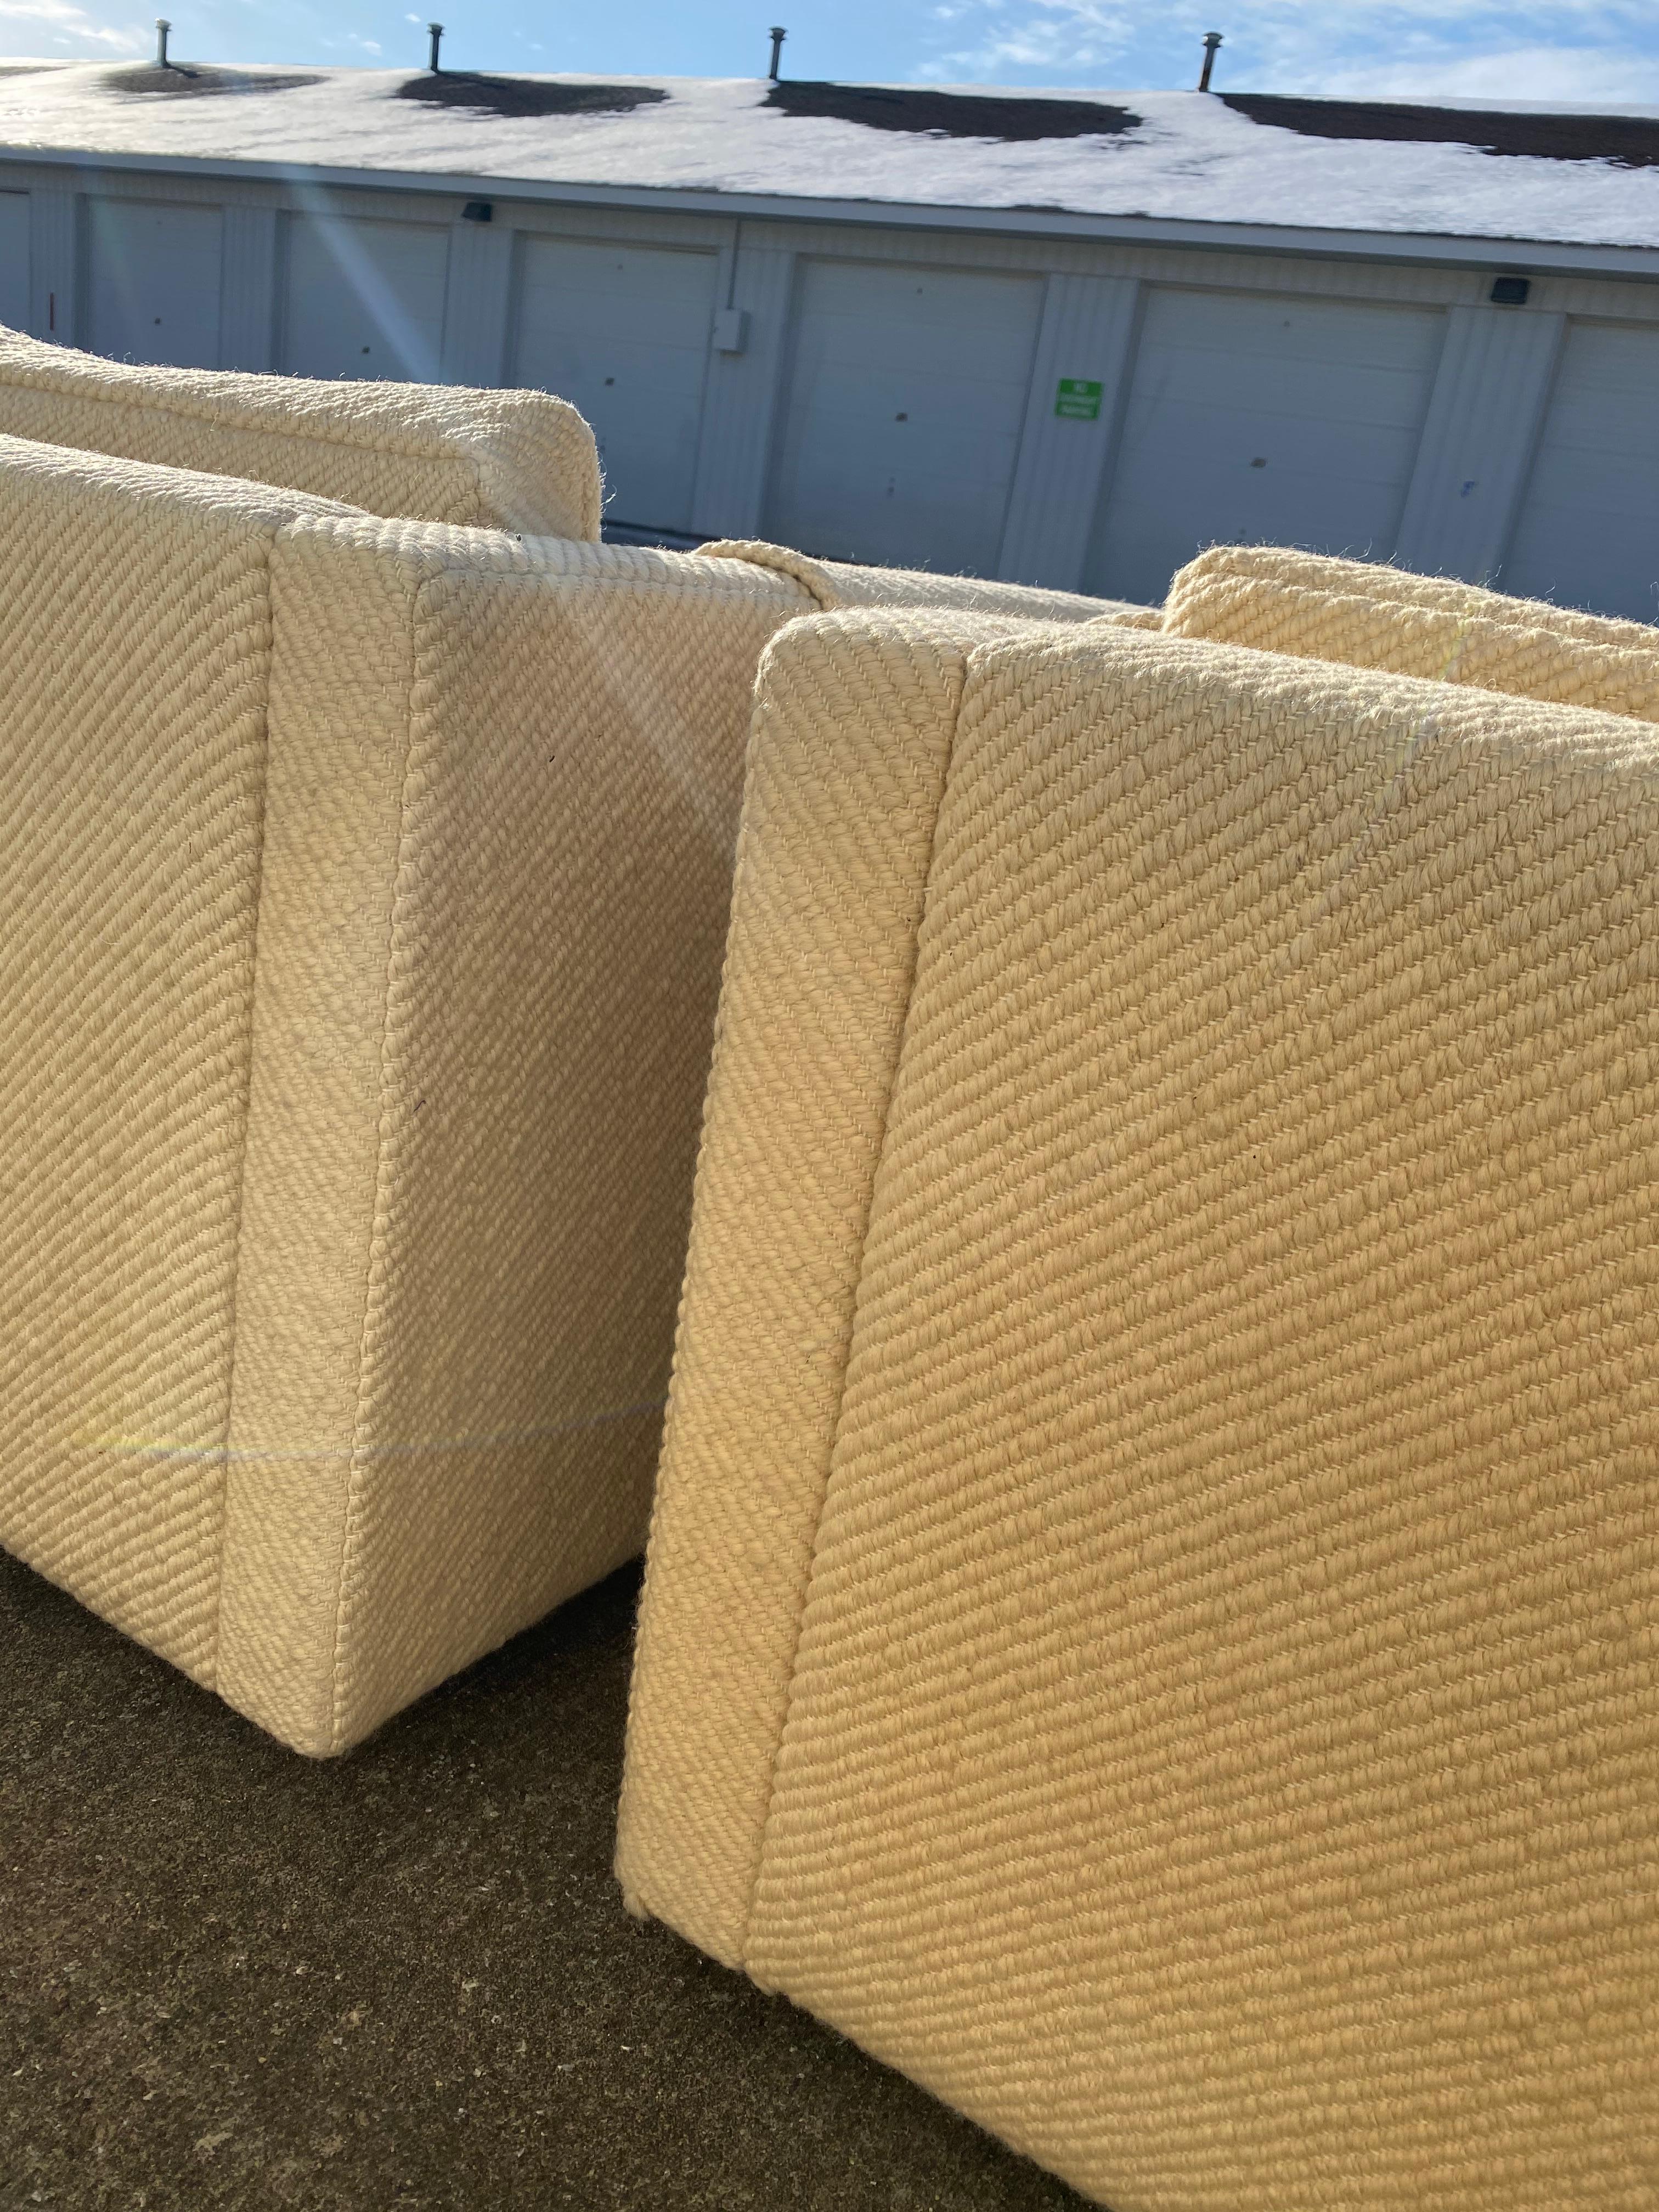 1970s Pair of Charles Pfister Cube Lounge Chairs for Knoll in Original Wool Fabr 1